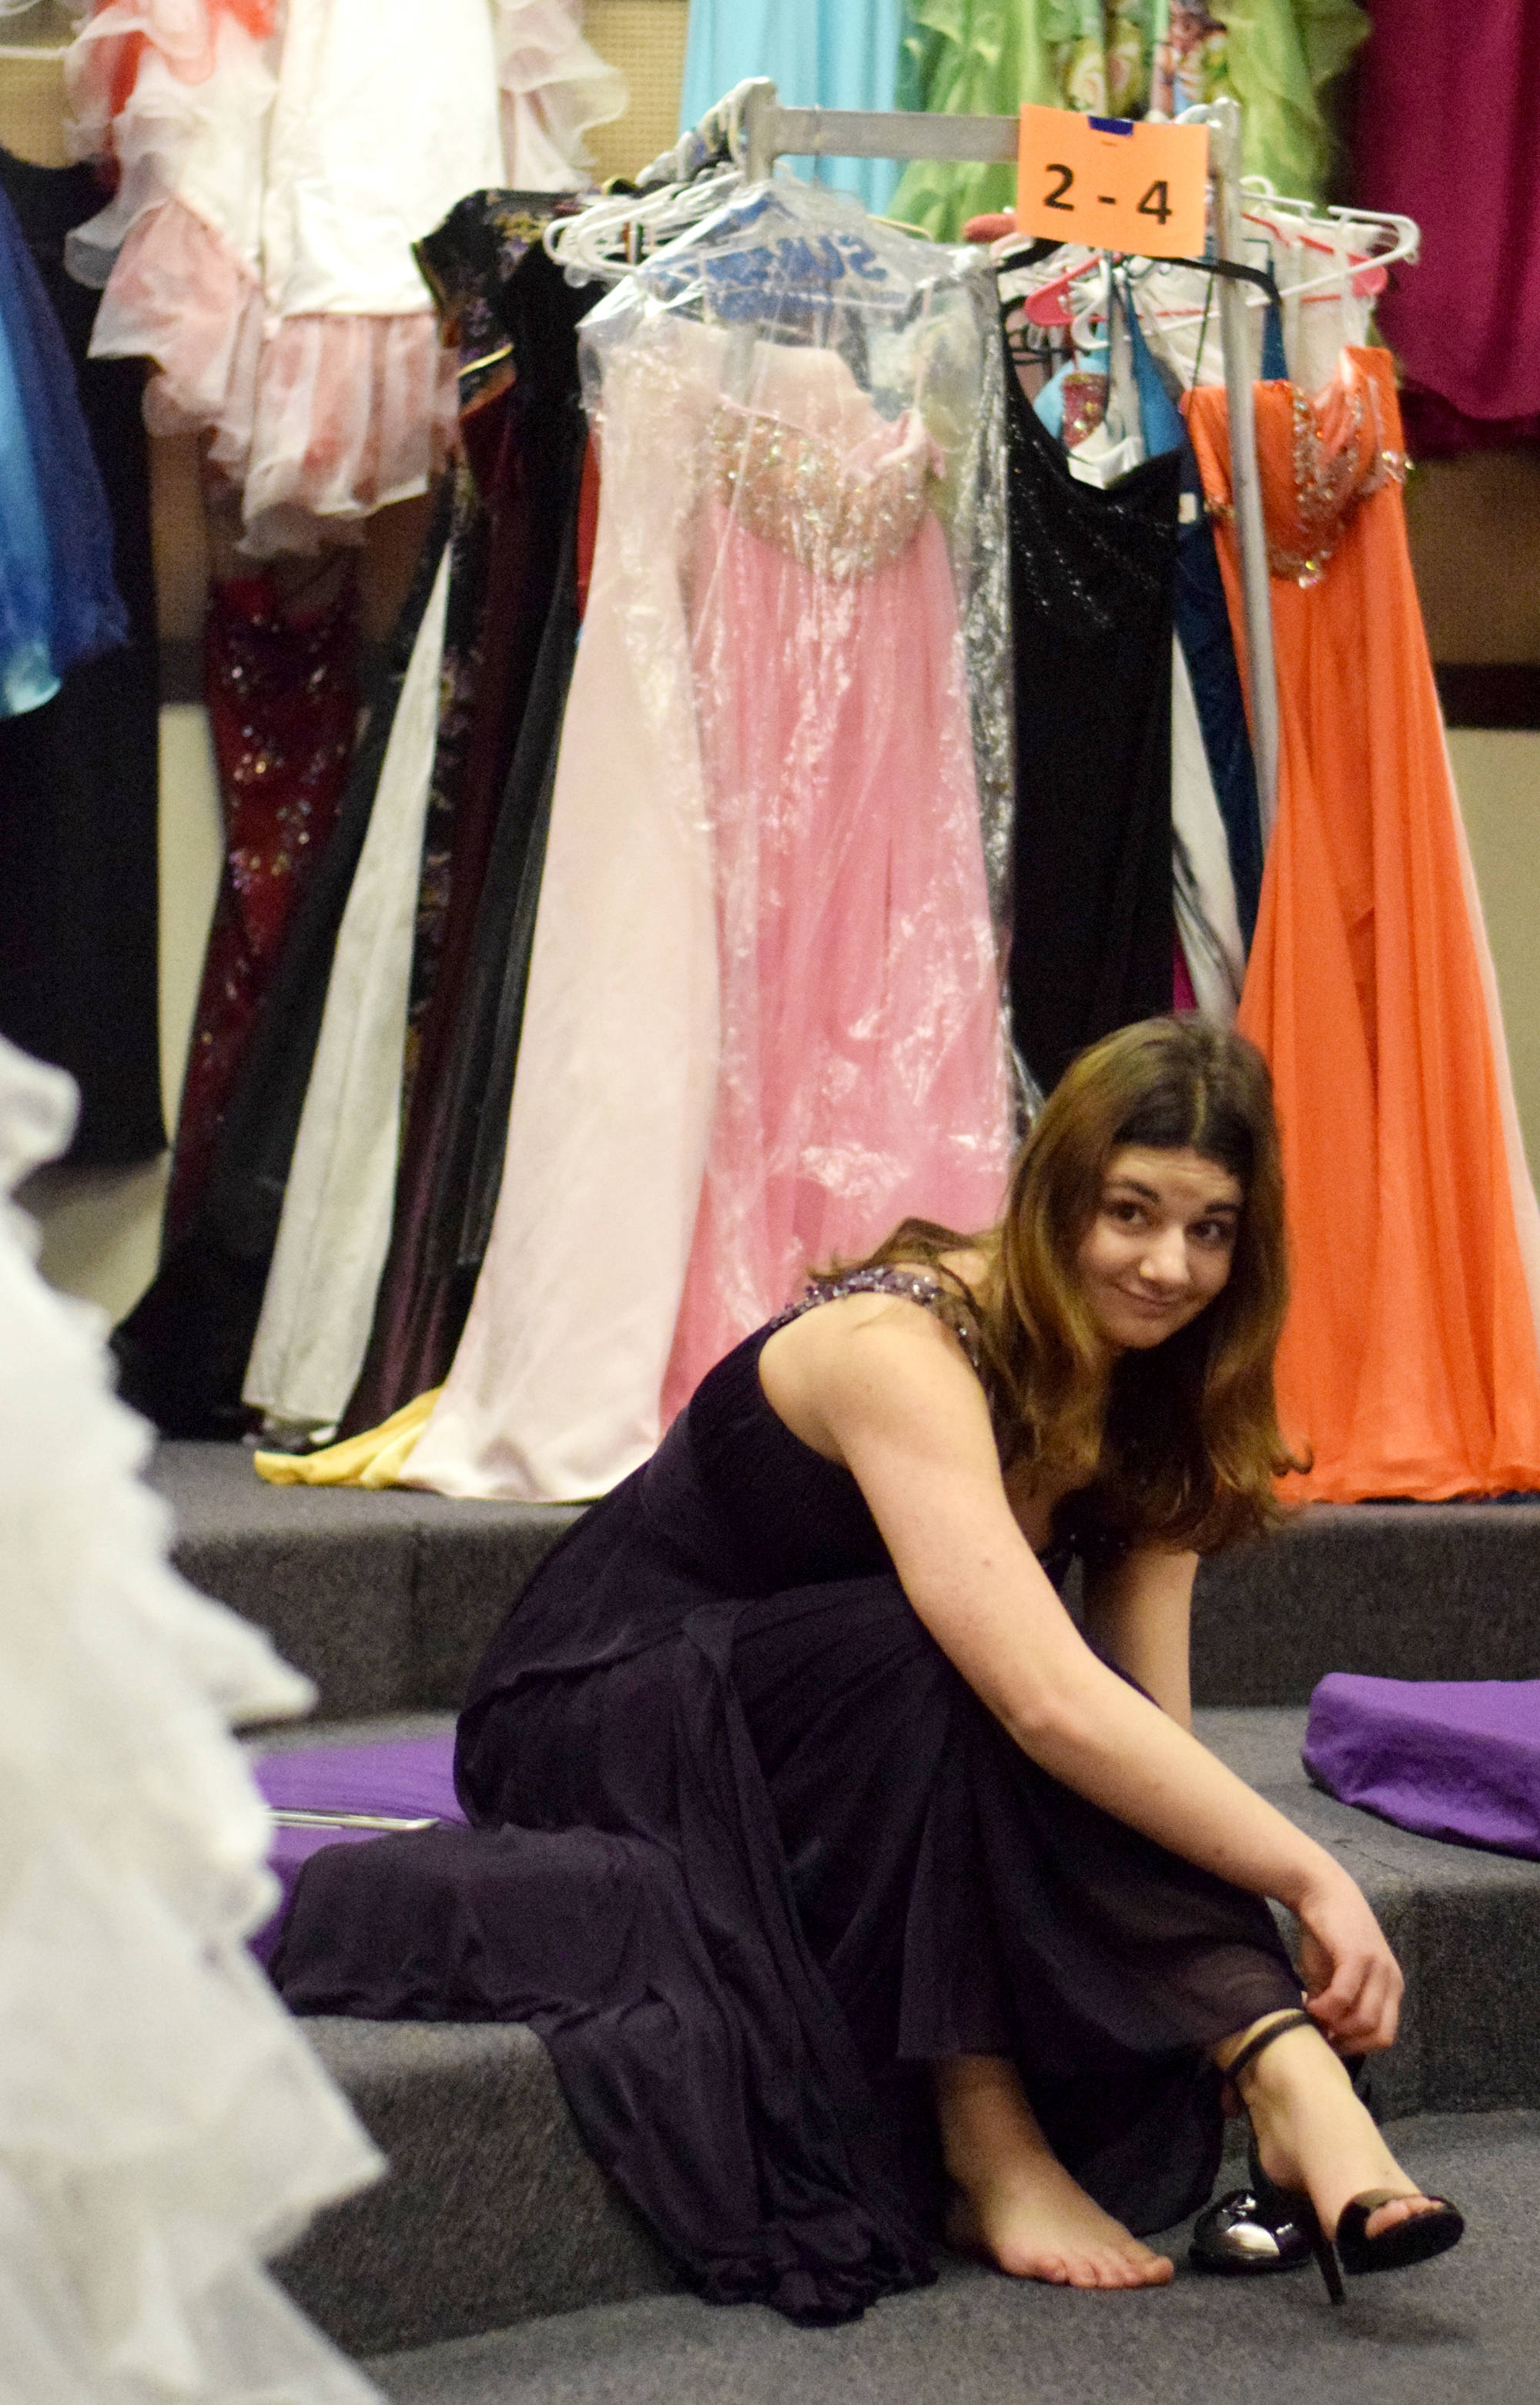 Nikiski High School junior Diana Narimanidze gives a look of approval Friday at Soldotna Prep School while trying on shoes to match a dress she found at Cinderella’s Closet, a program that provides free prom dresses and accessories to girls throughout the school district. (Photo by Kat Sorensen/Peninsula Clarion)